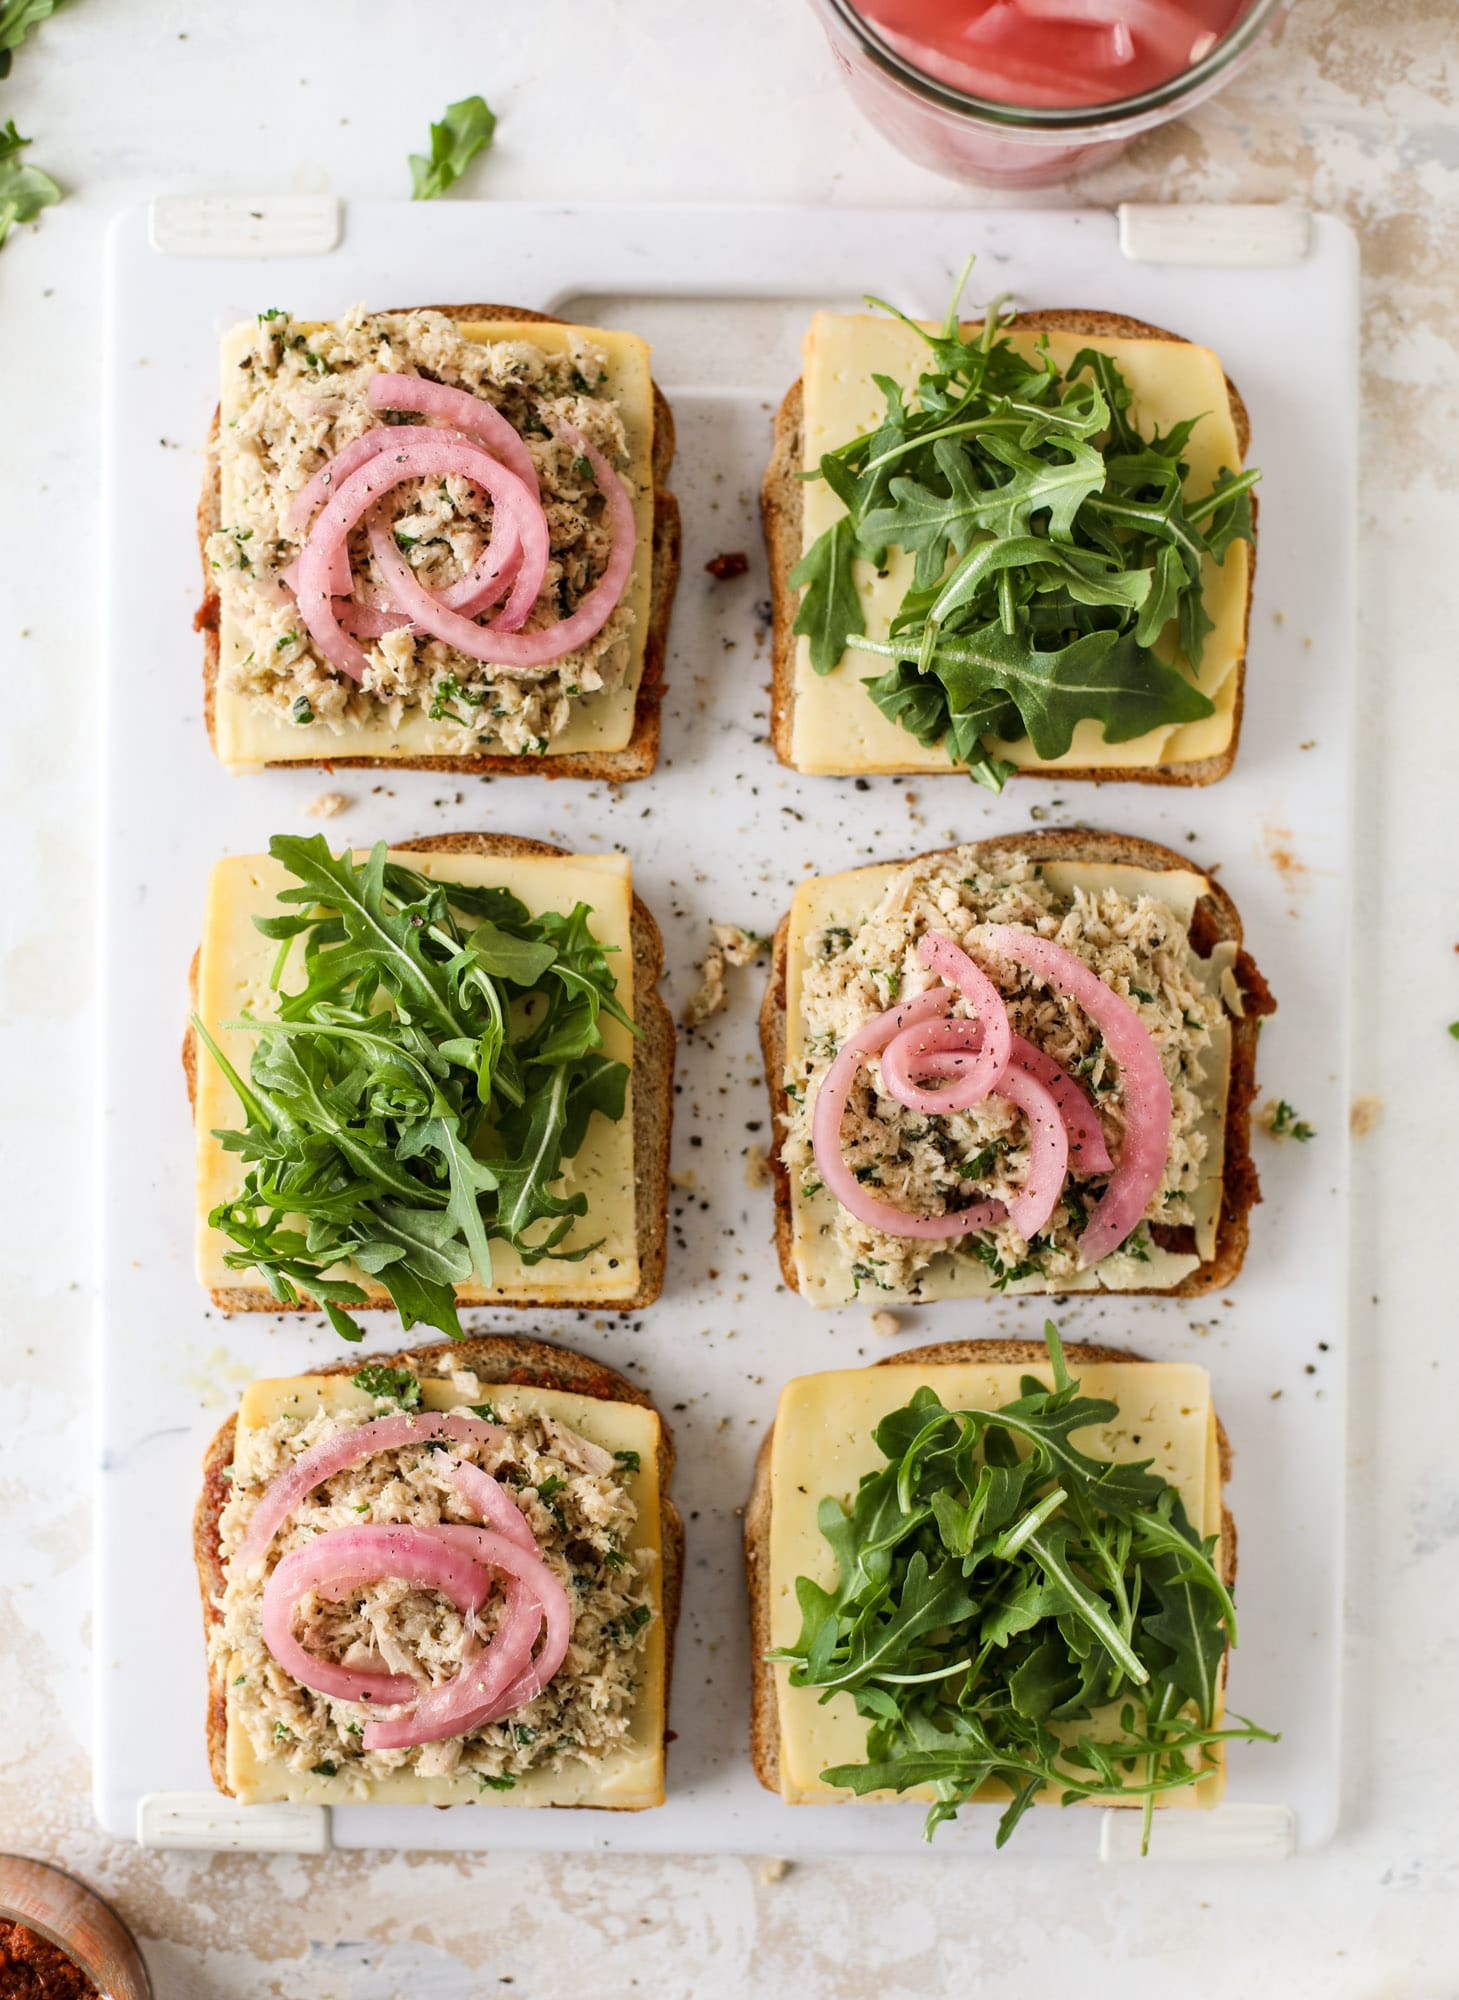 These are my top 60 best lunch ideas that make eating at work so much more delicious! These are easy, mostly make-ahead and healthy lunch ideas. 